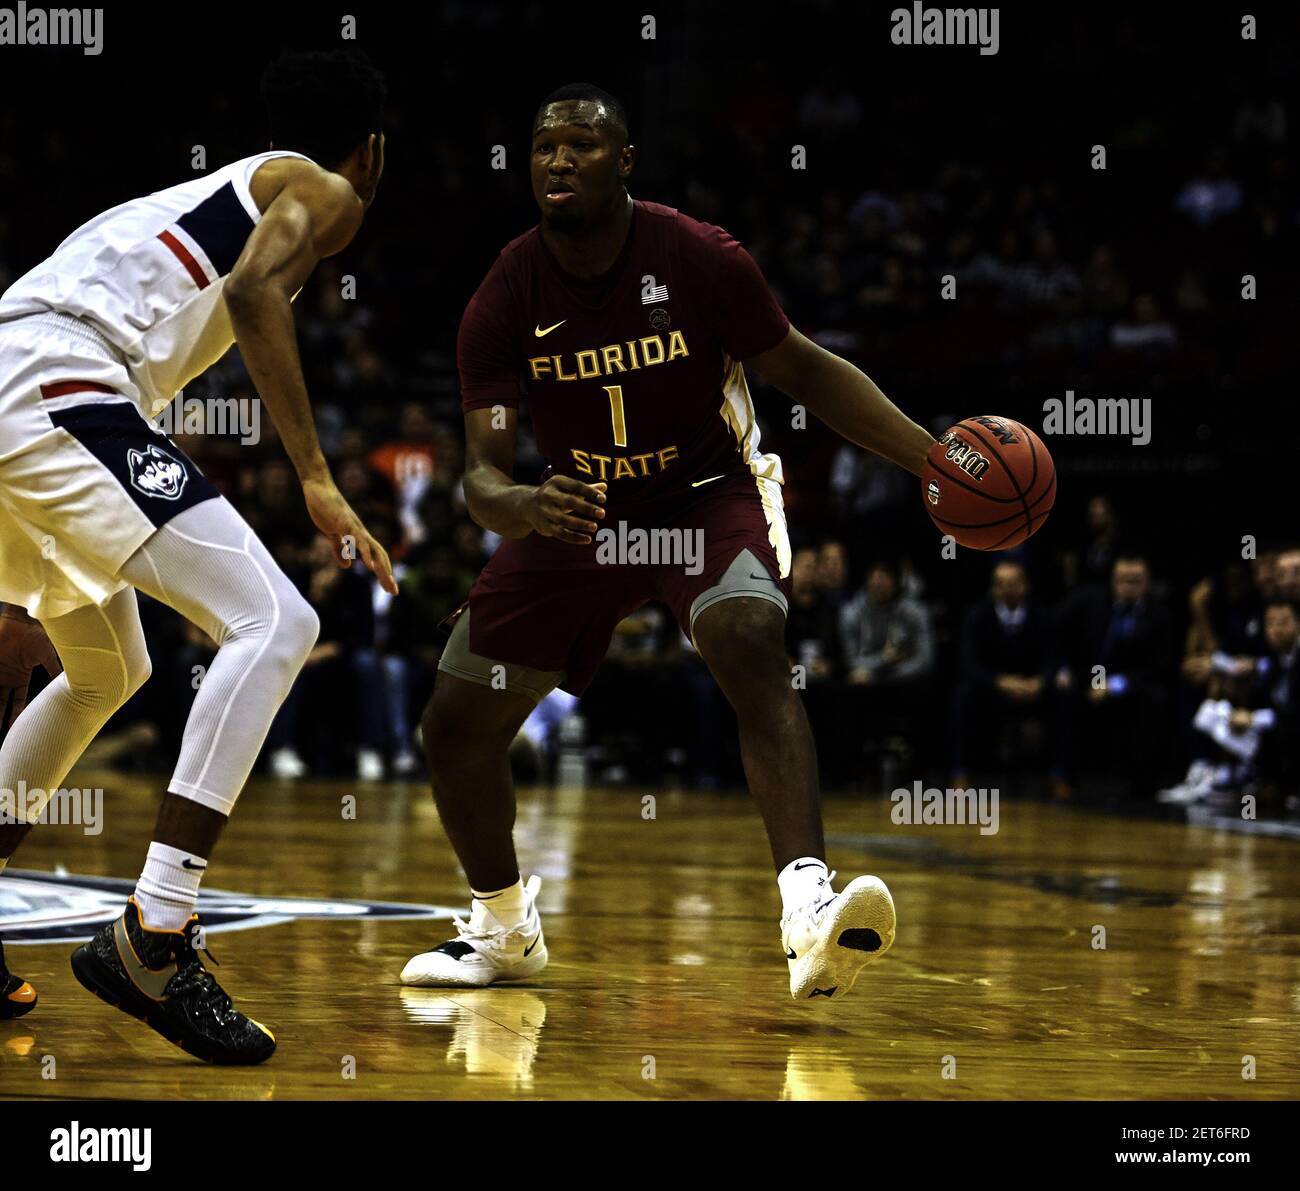 December 8, 2018 - Newark, New Jersey, U.S. - Florida State Seminoles forward Raiquan Gray (1) during the Never Forget Tribute Classic between the Florida State Seminoles and the UConn Huskies at the Prudential Center in Newark, New Jersey. Florida State defeated UConn 82-71. Duncan Williams/(Photo by Duncan Williams/CSM/Sipa USA) Stock Photo